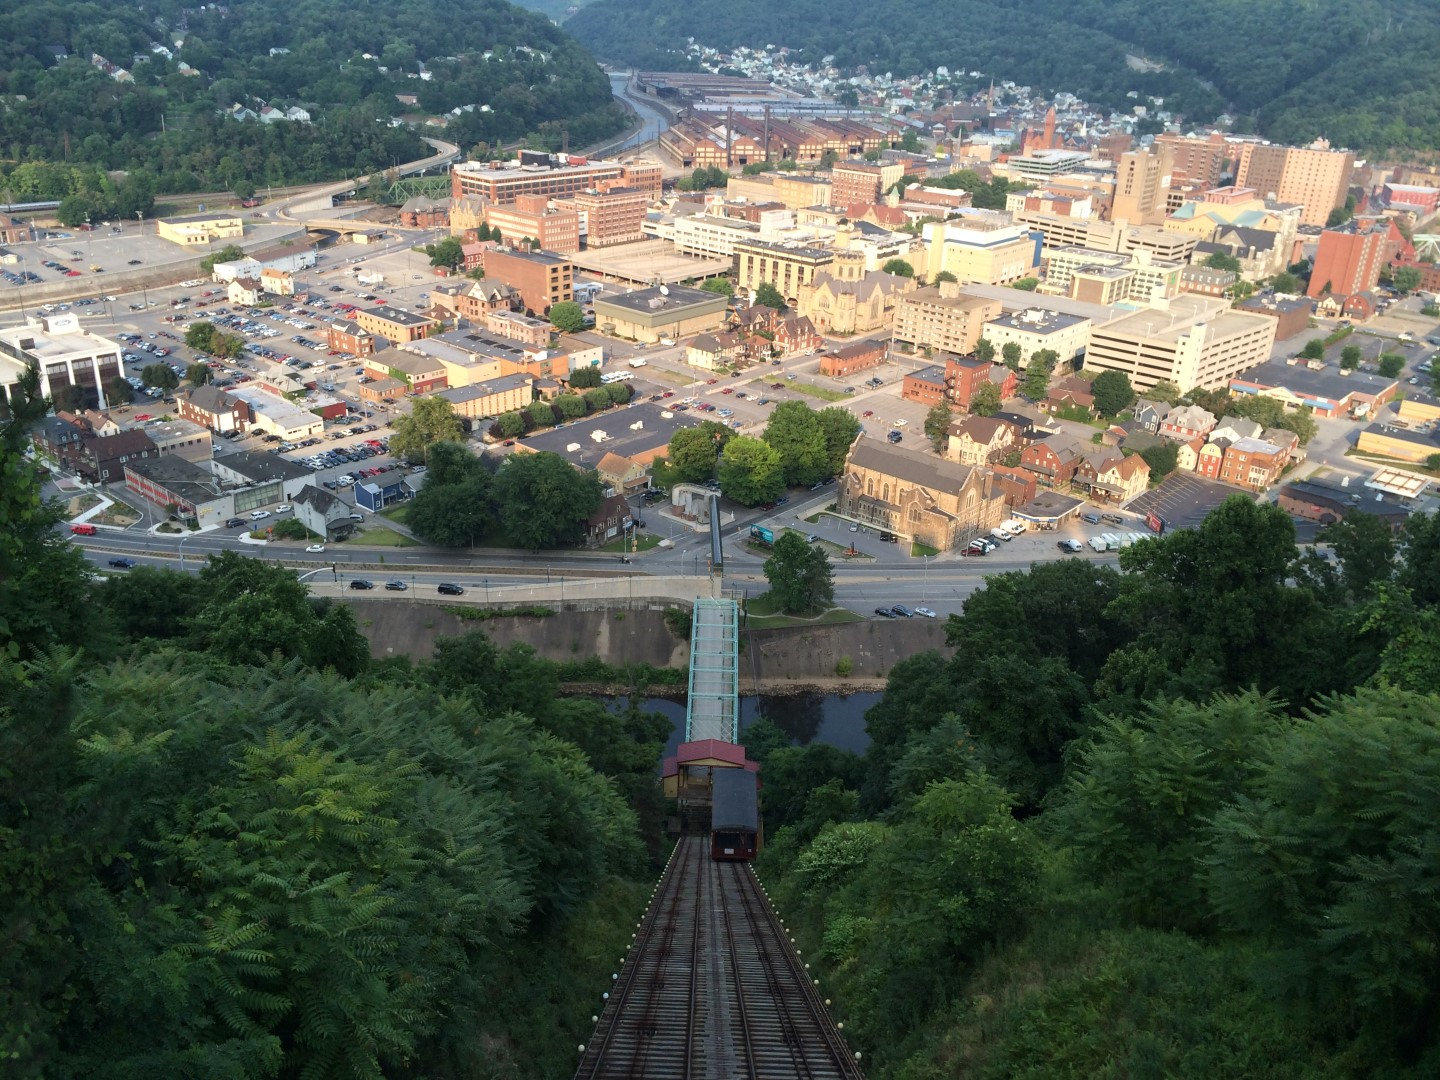 Incline View